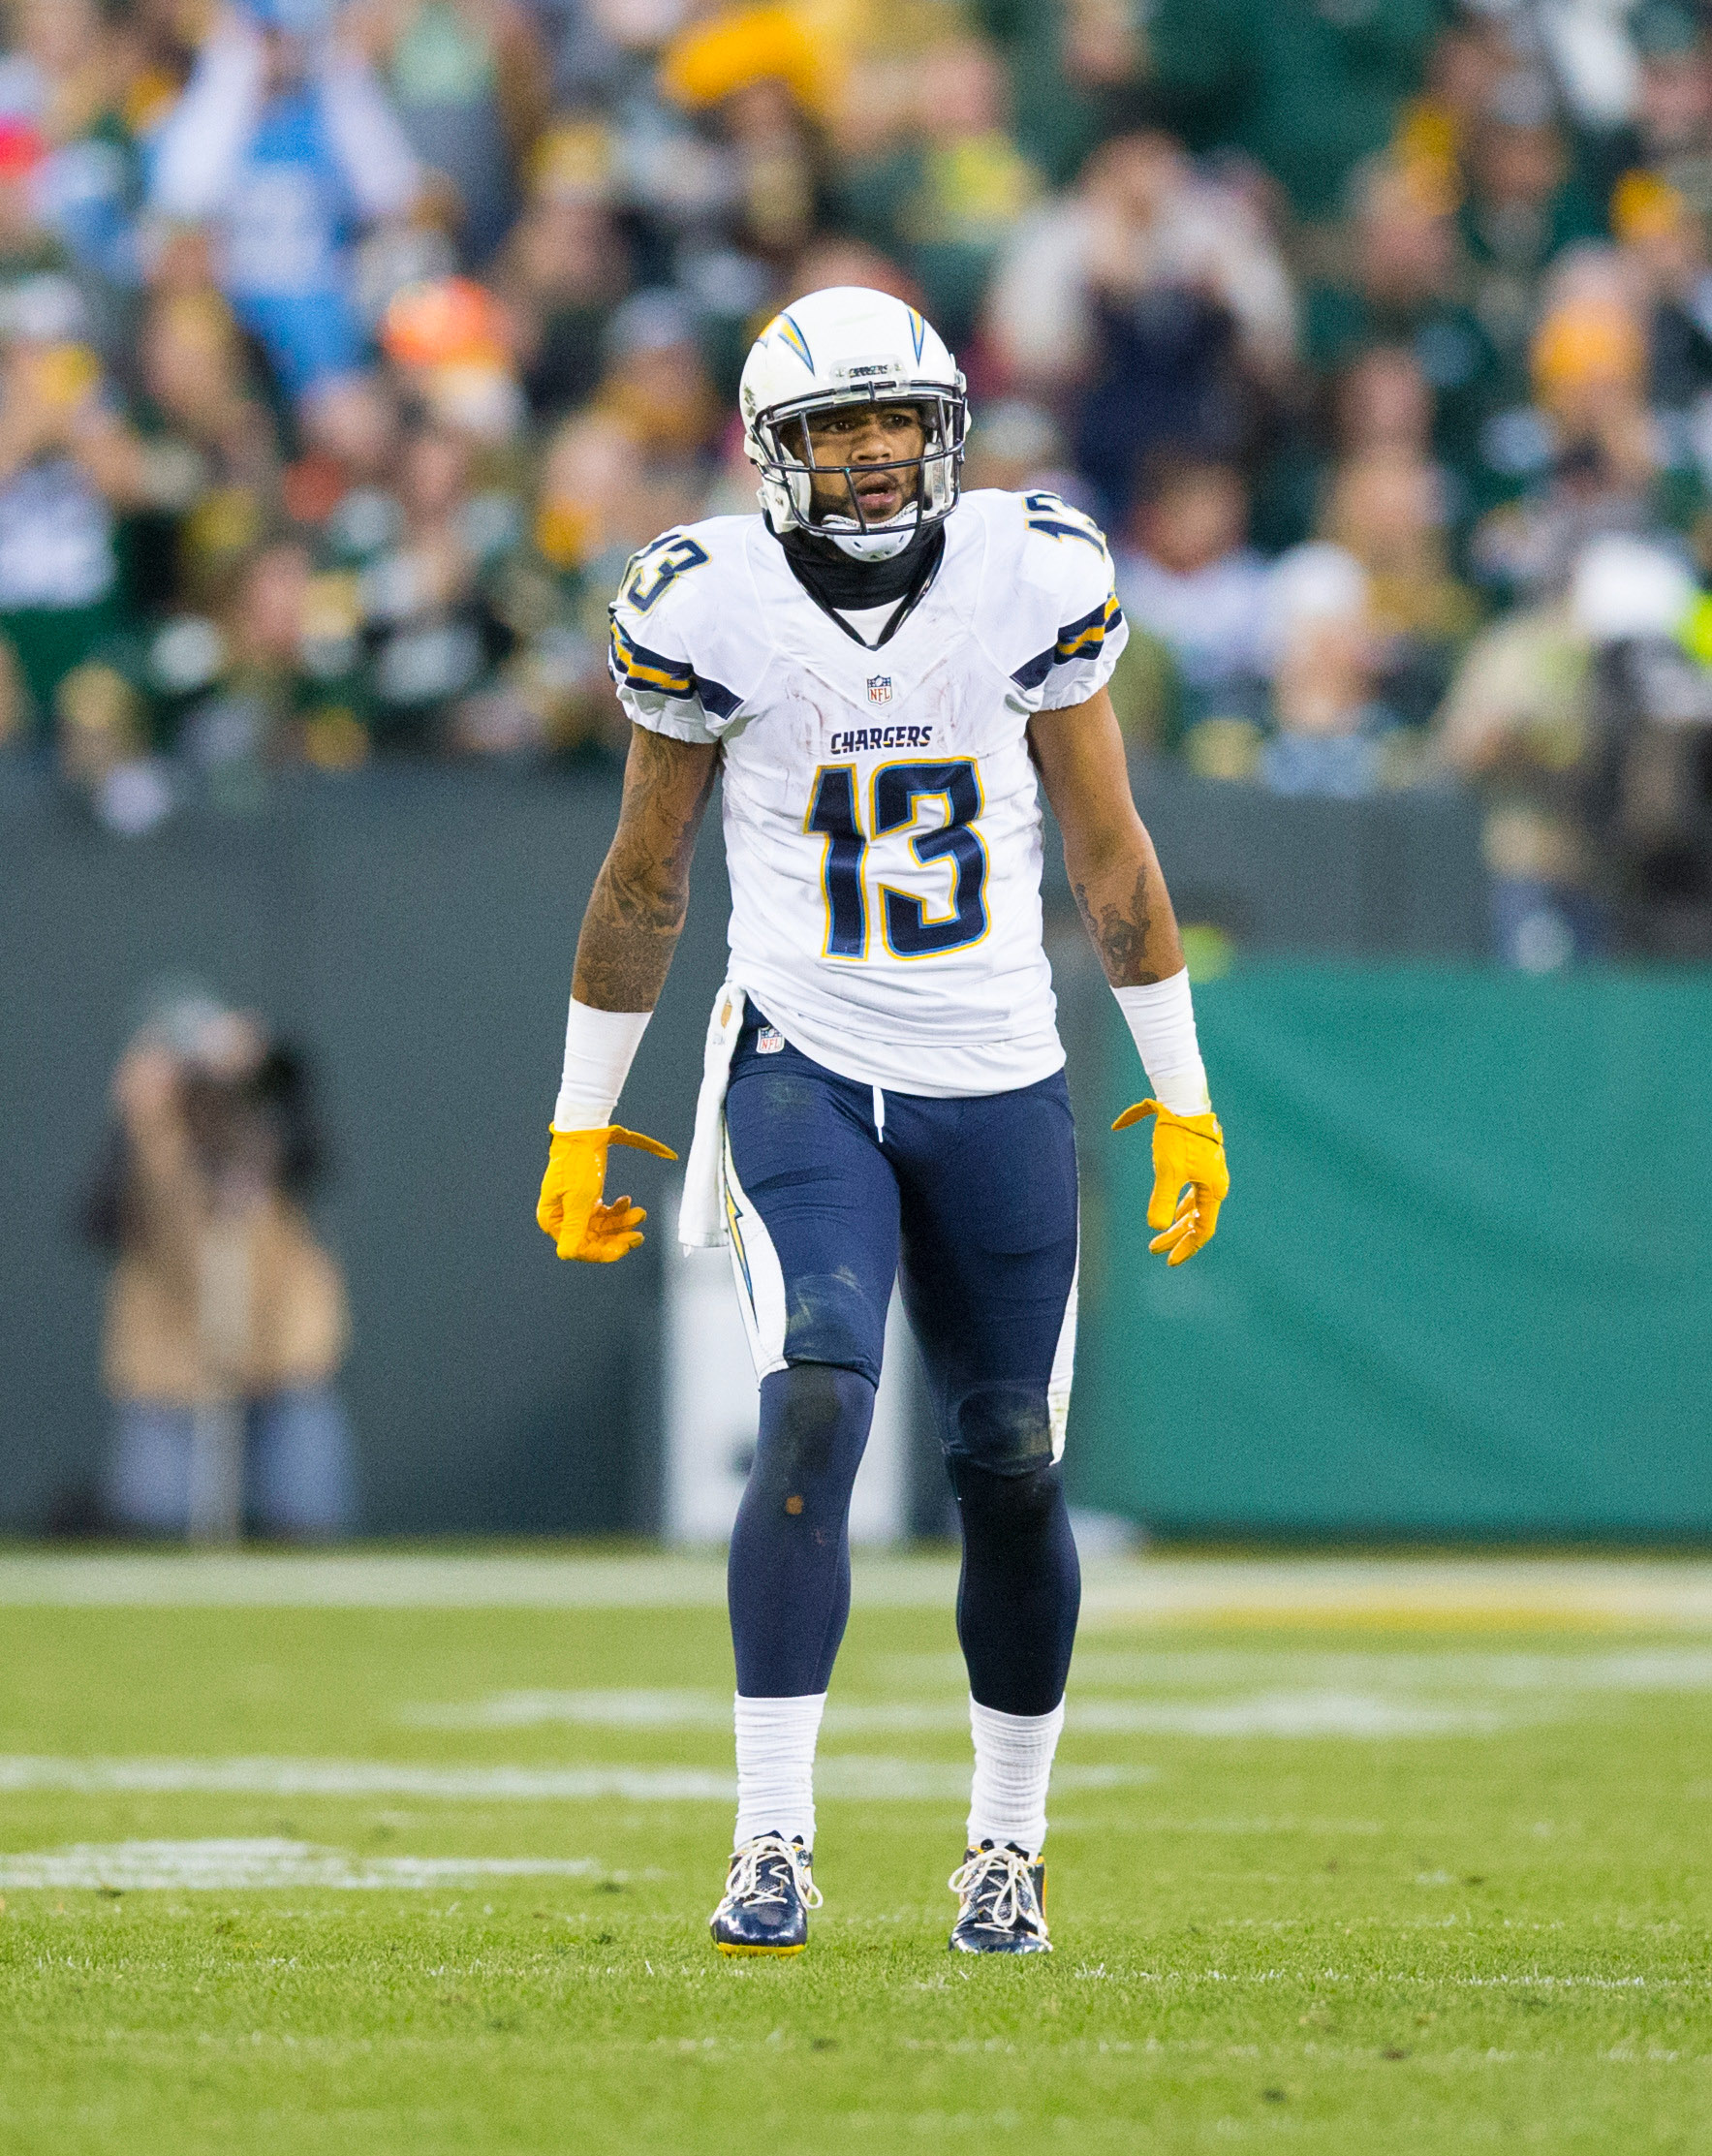 Los Angeles Chargers WR Keenan Allen ruled out with hamstring injury